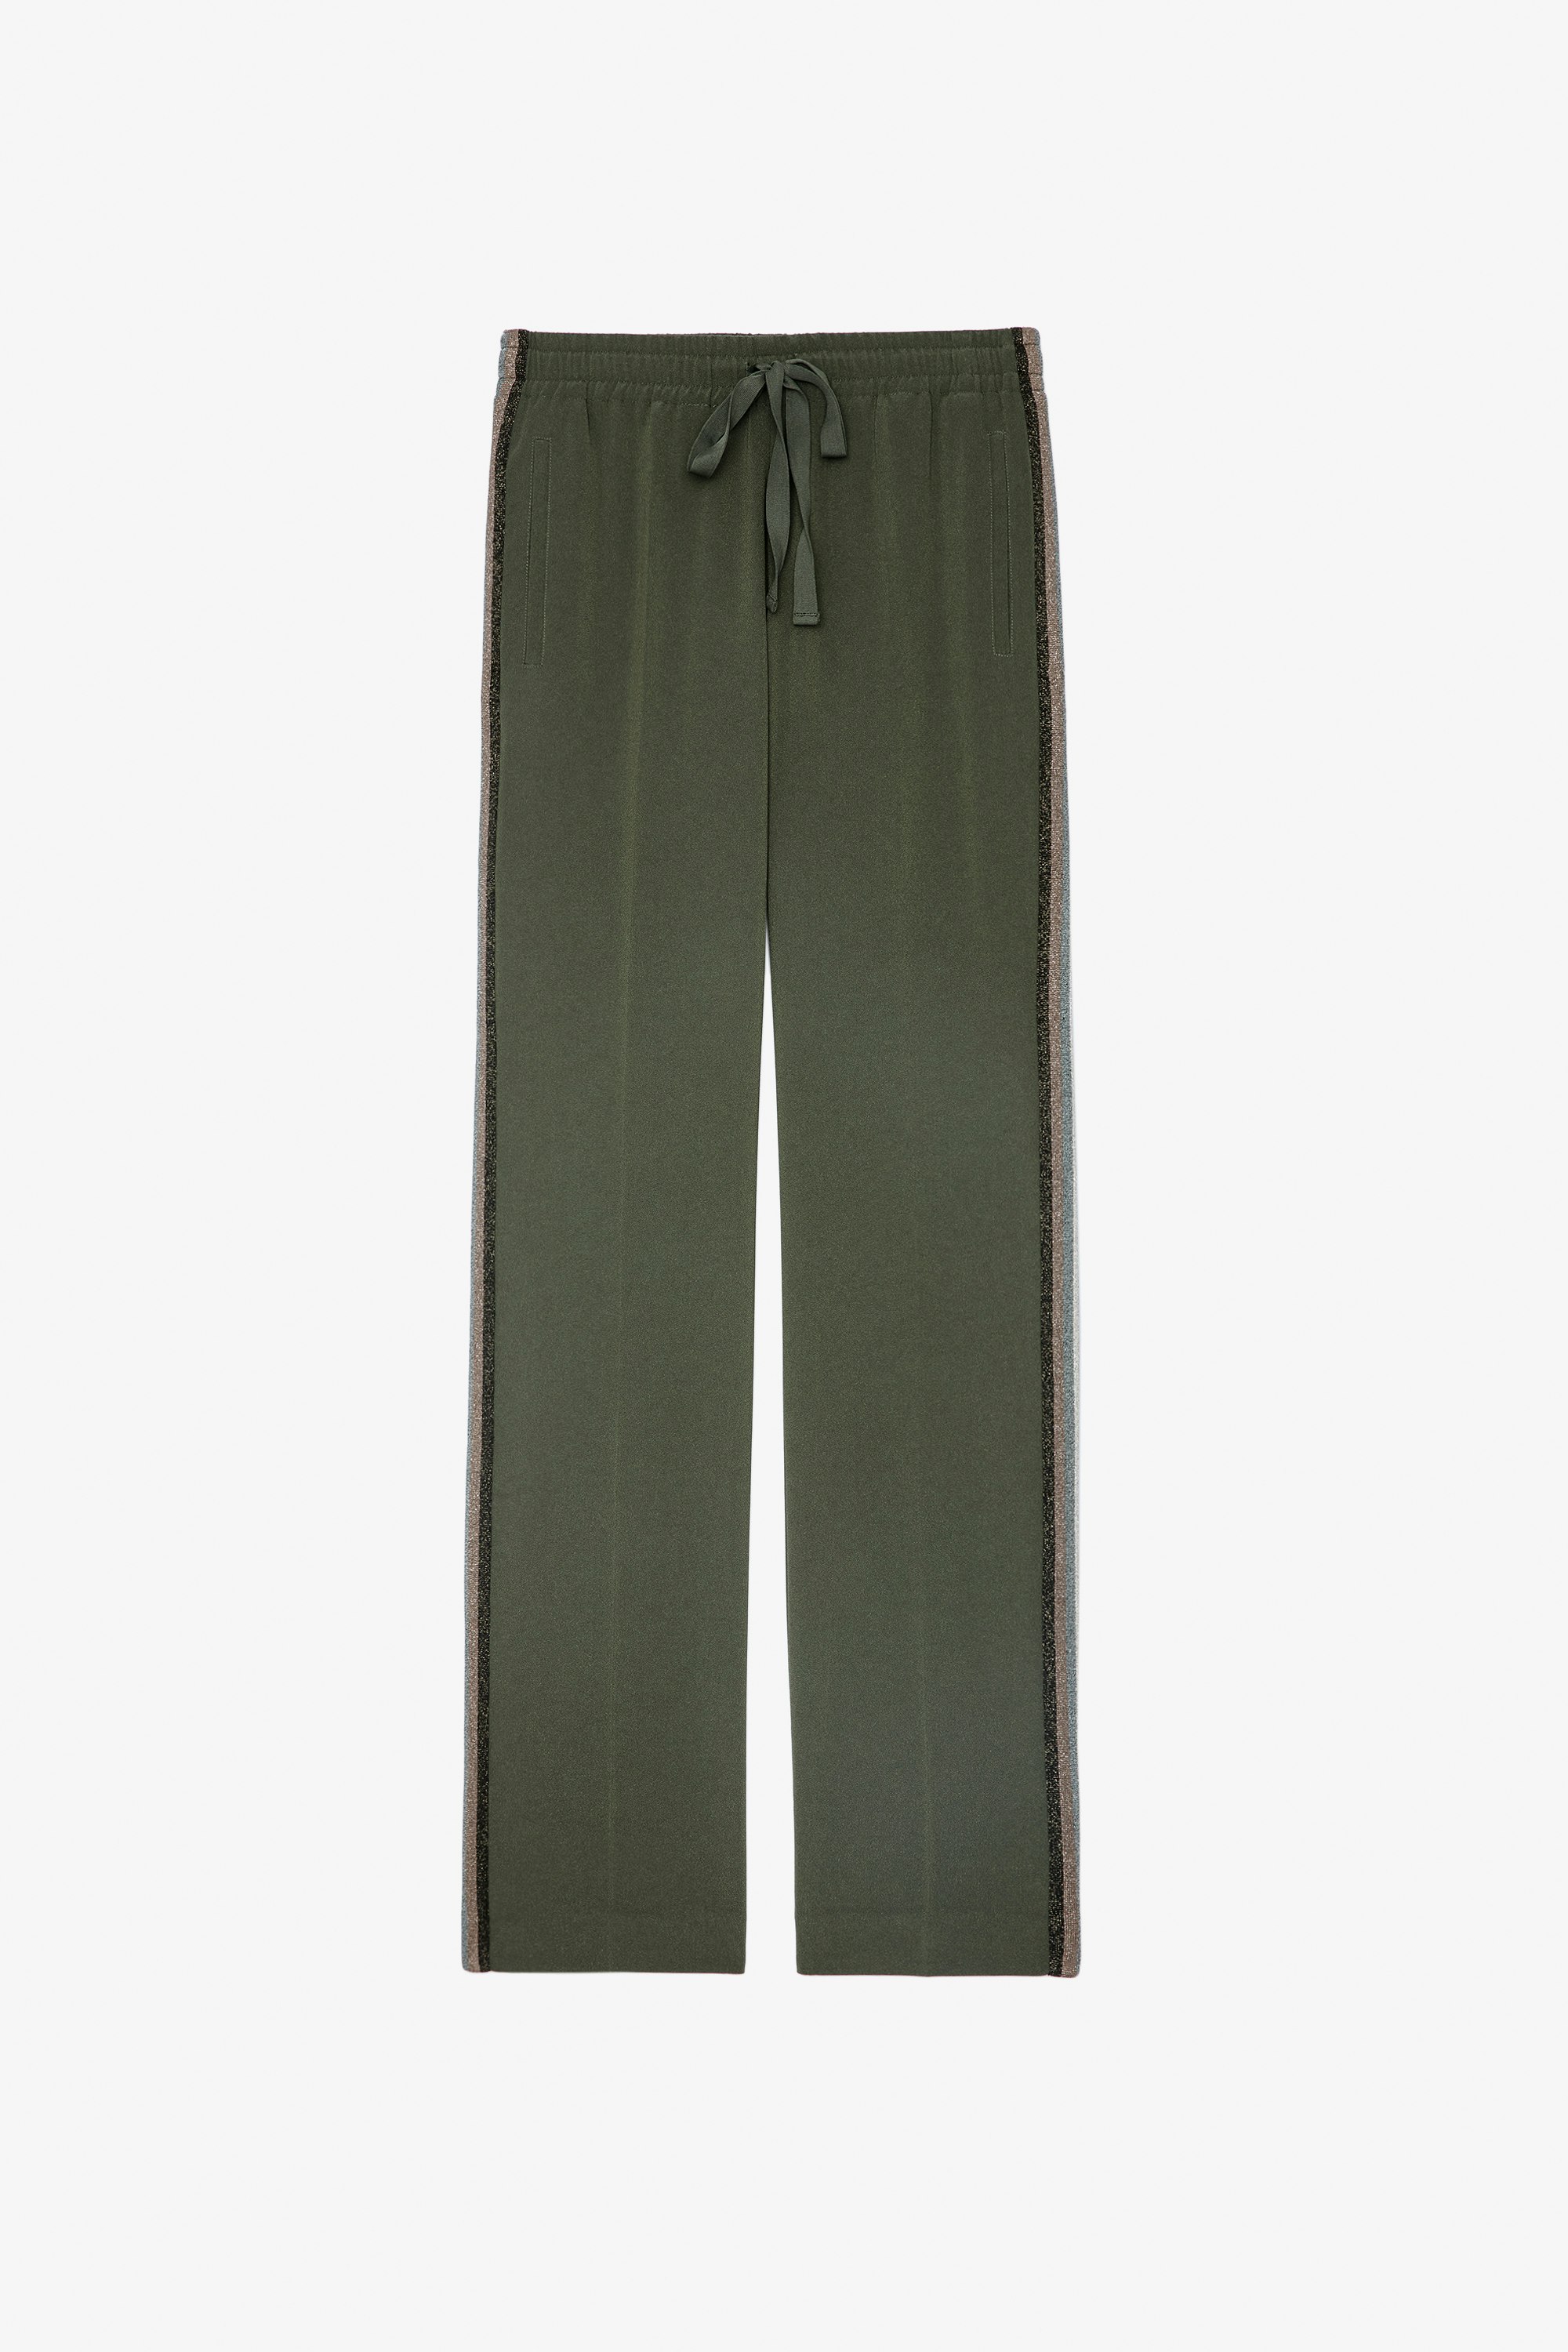 Pomy Trousers Women's khaki trousers with glittery side bands